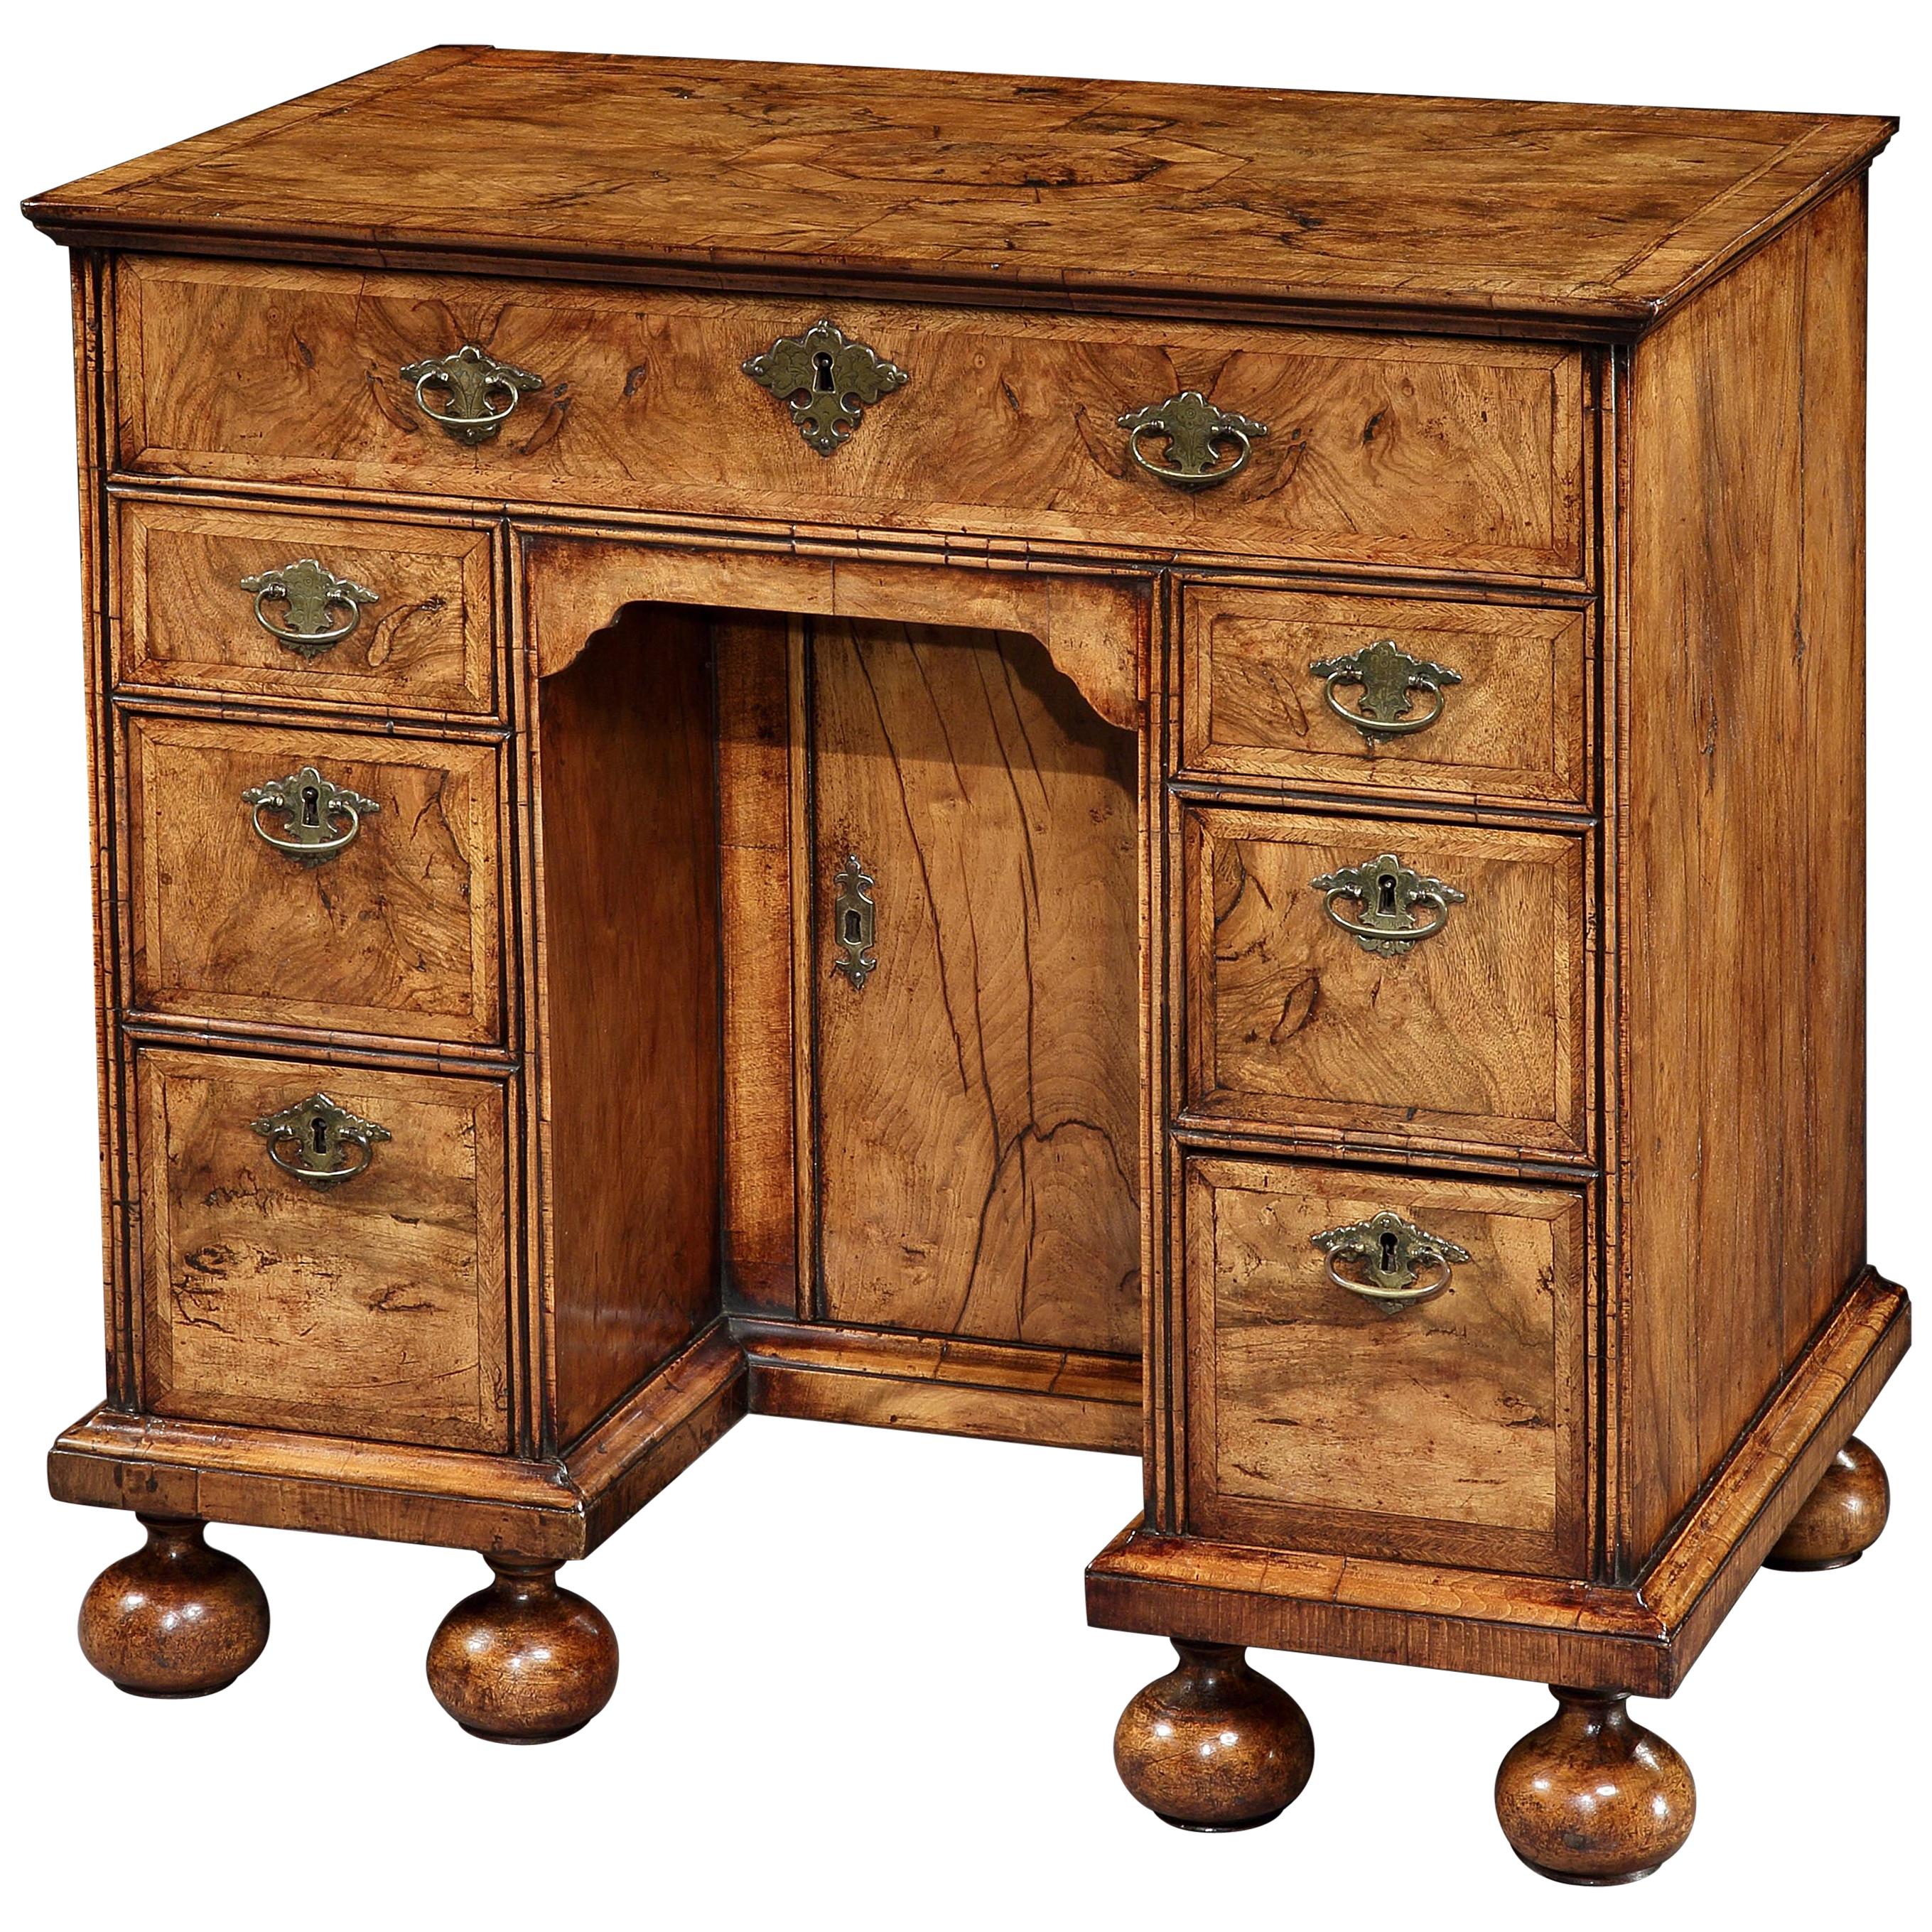 18th Century Queen Anne Walnut Kneehole Desk For Sale At 1stdibs